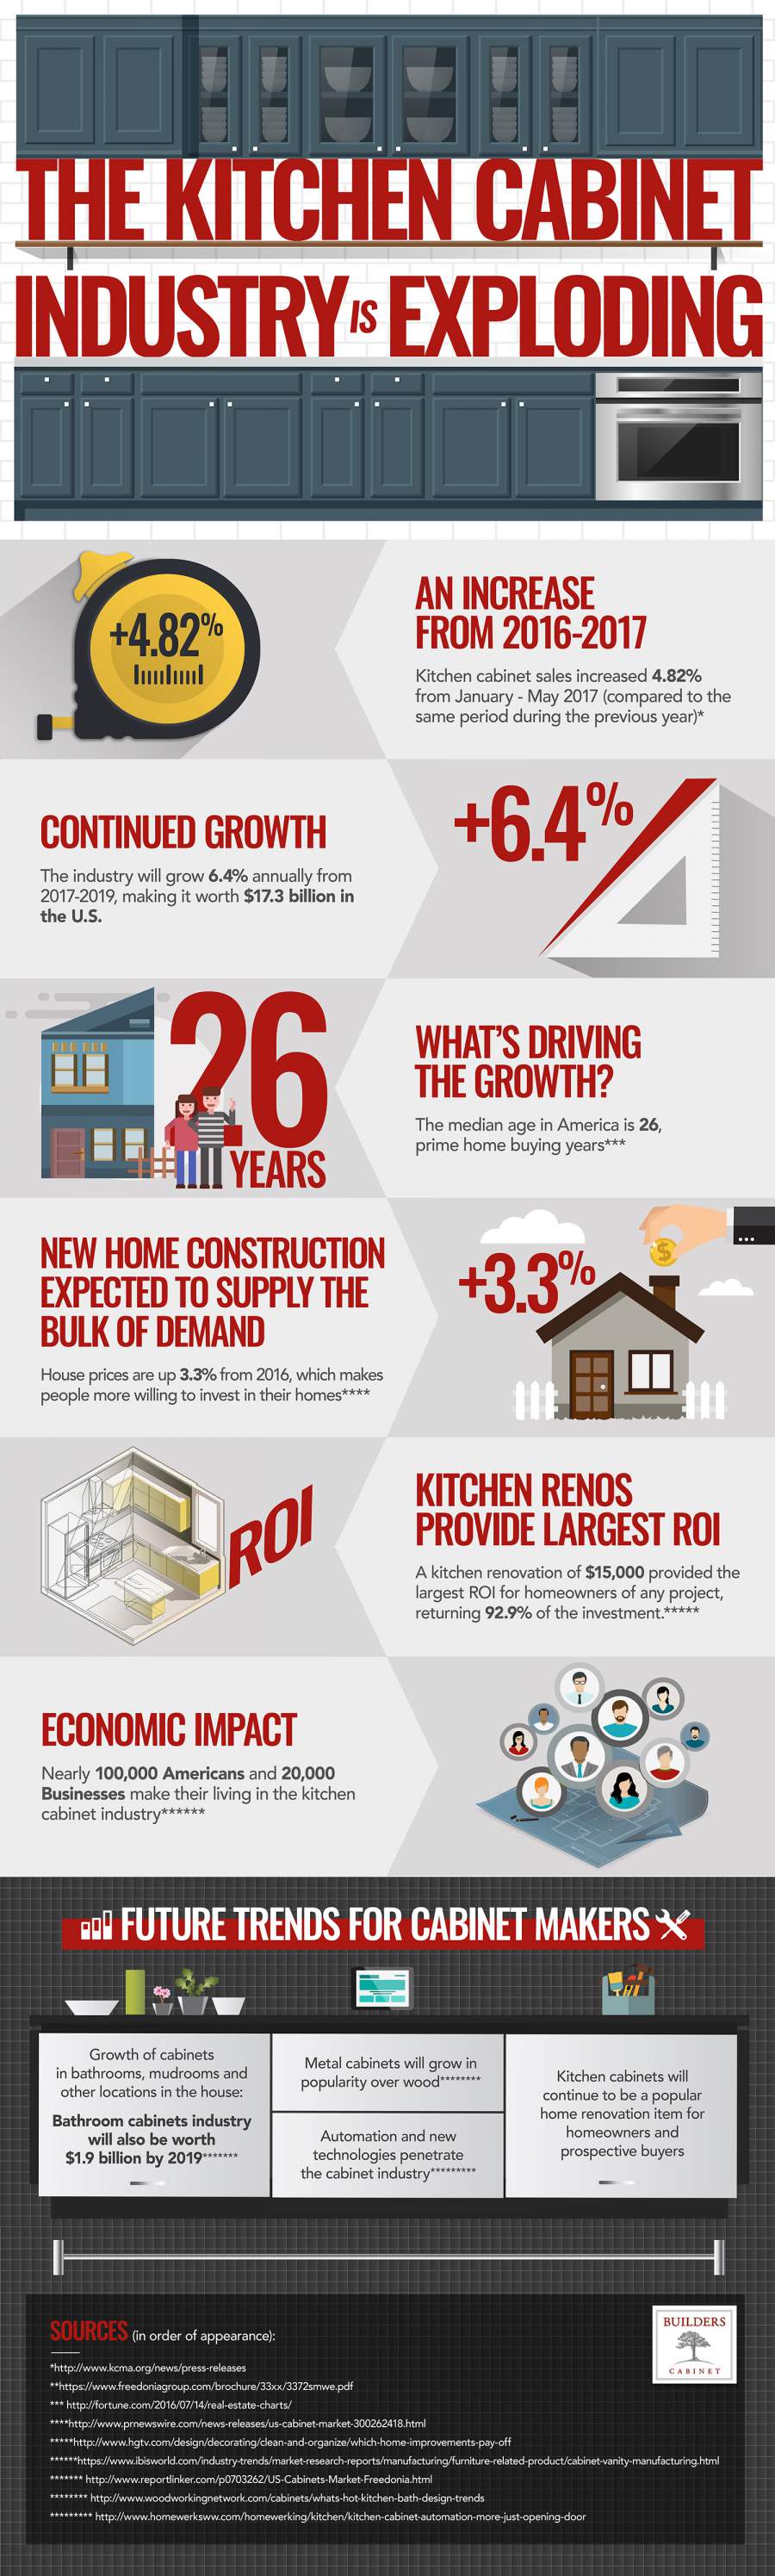 Kitchen Cabinet Industry is Exploding